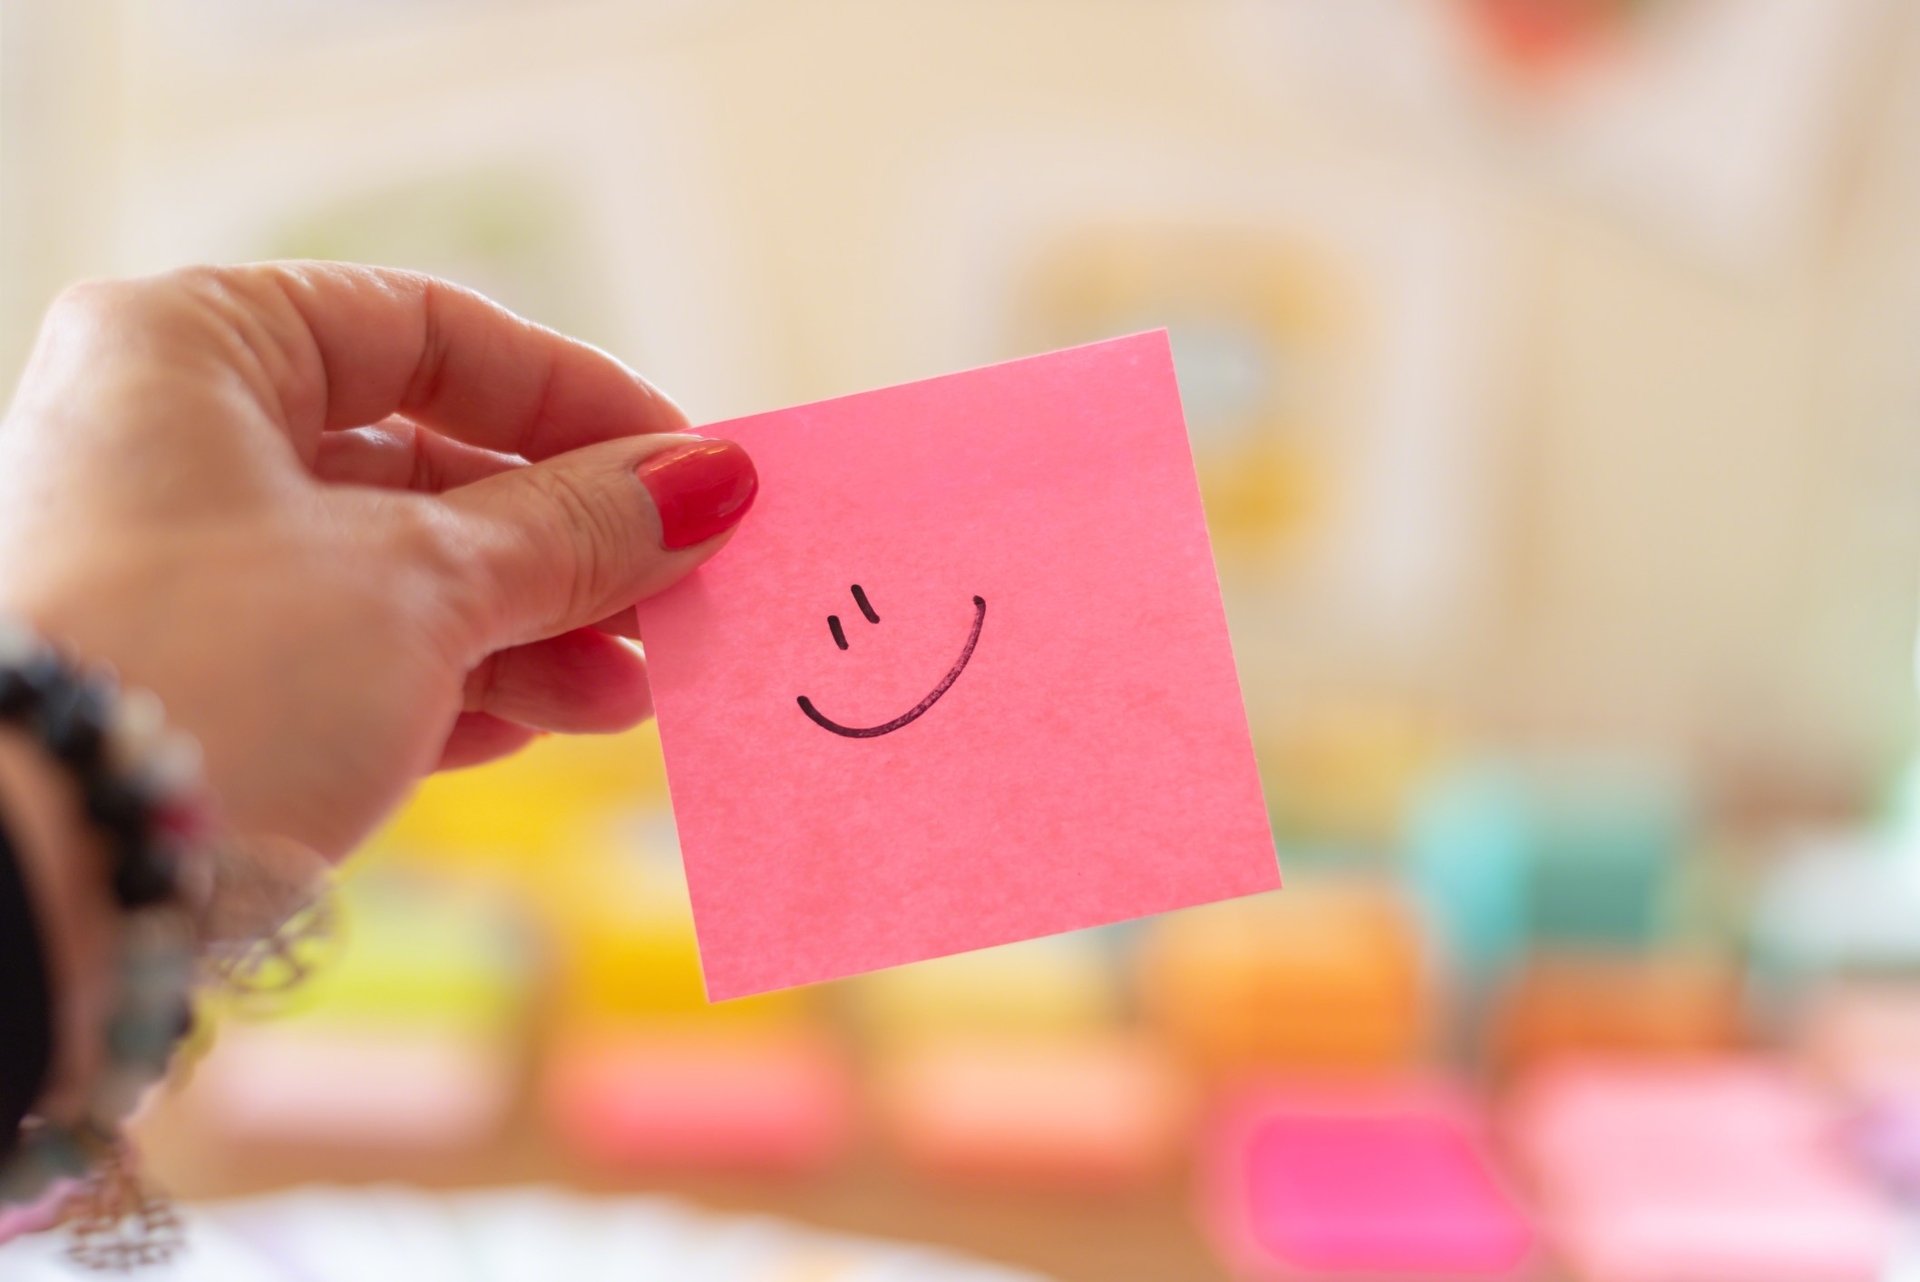 Bright pink sticky note with a smiley face